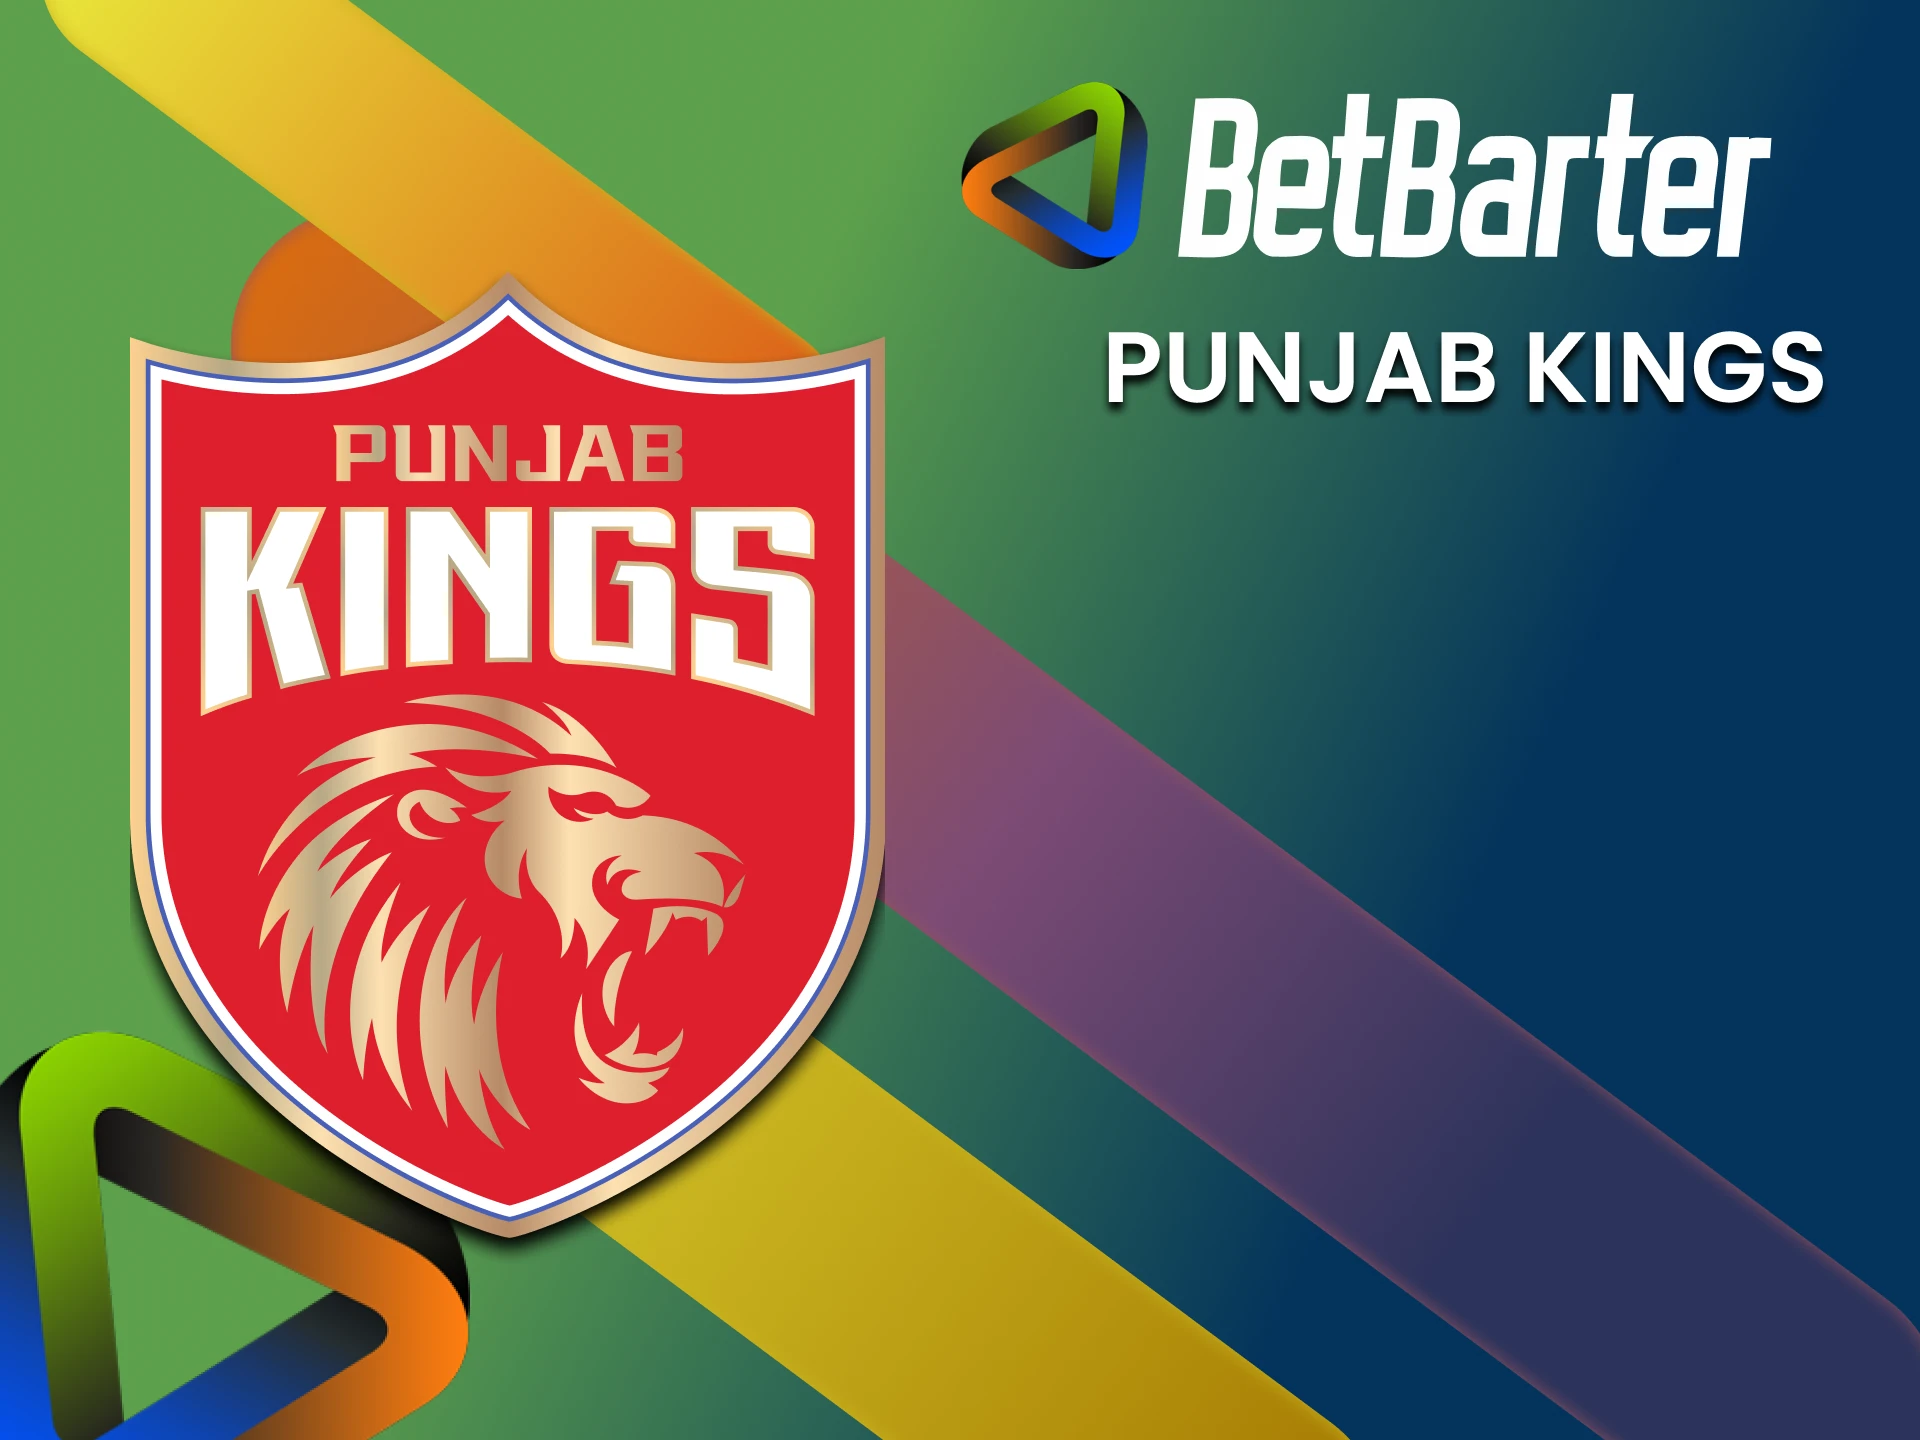 To bet on the IPL from BetBarter, choose the Punjab Kings team.